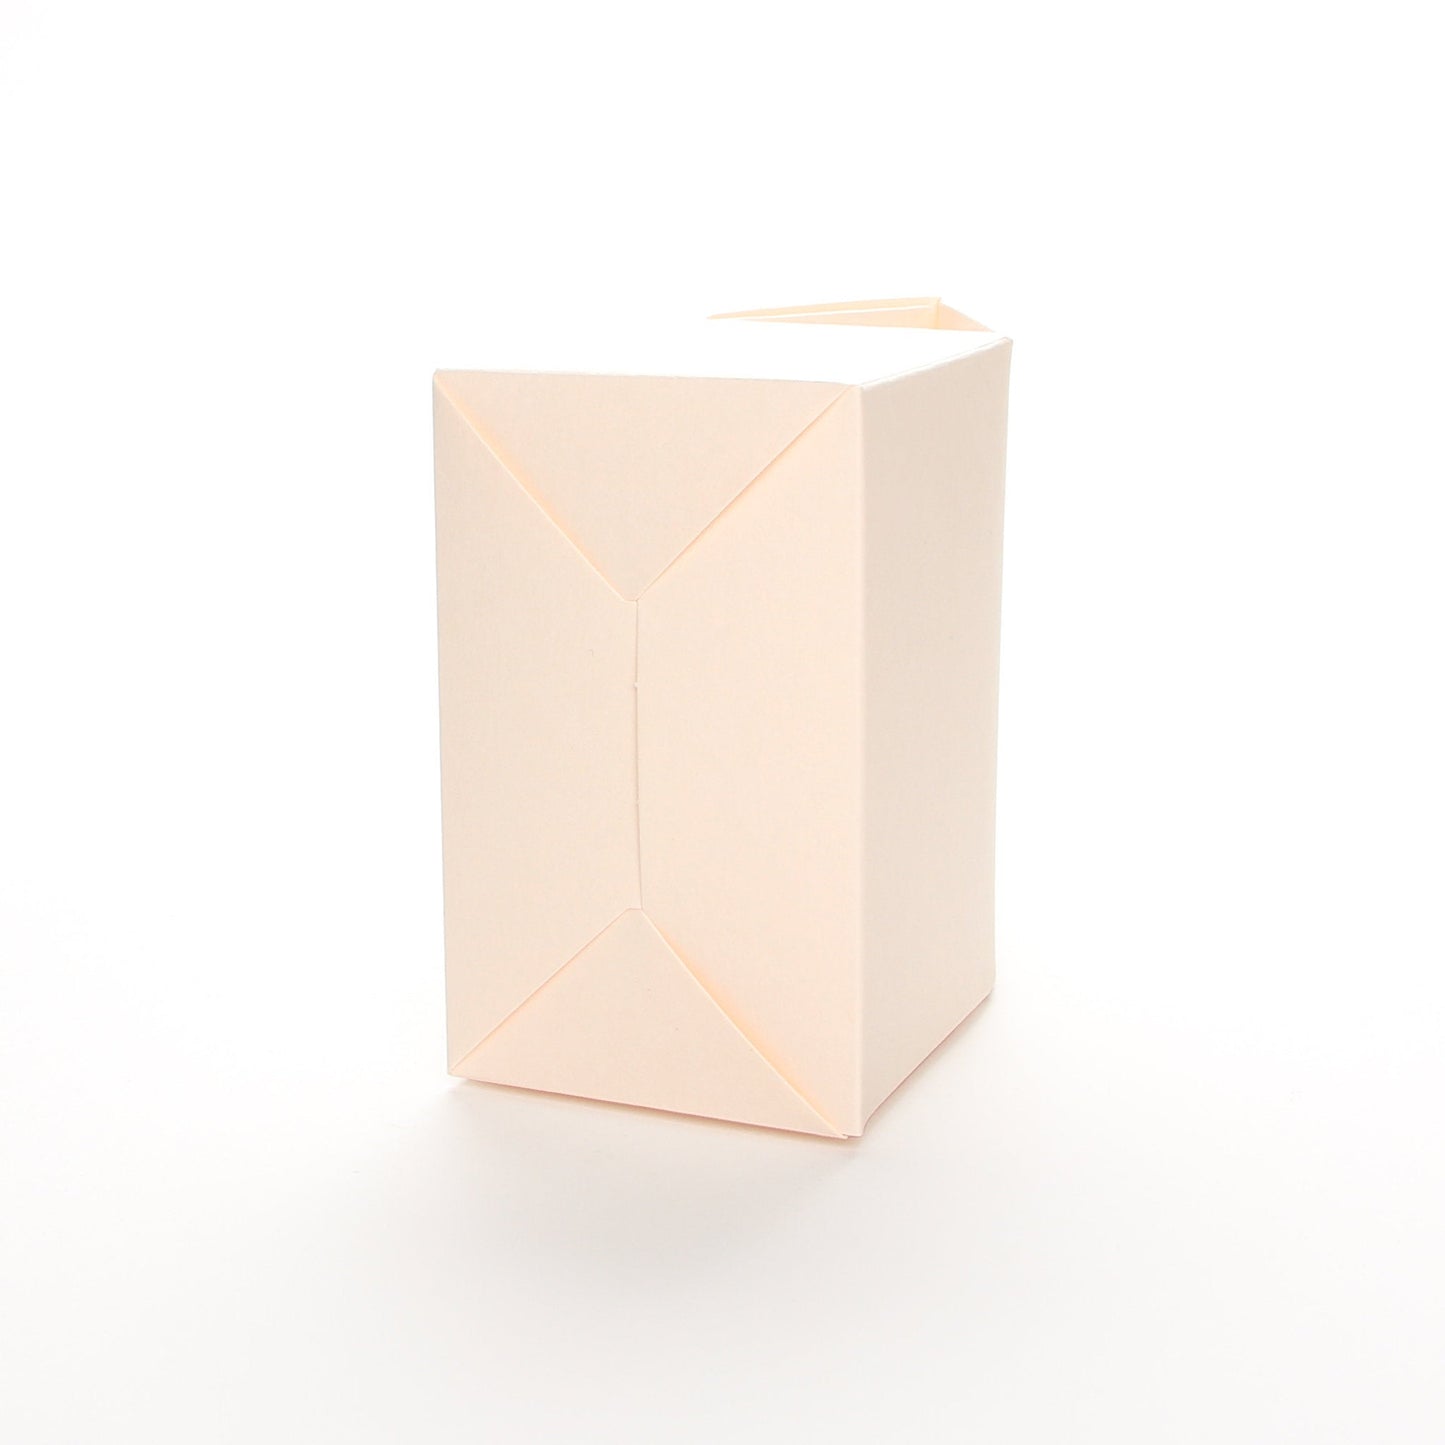 Bottom view of Lux Party’s blush favor box on a white background.